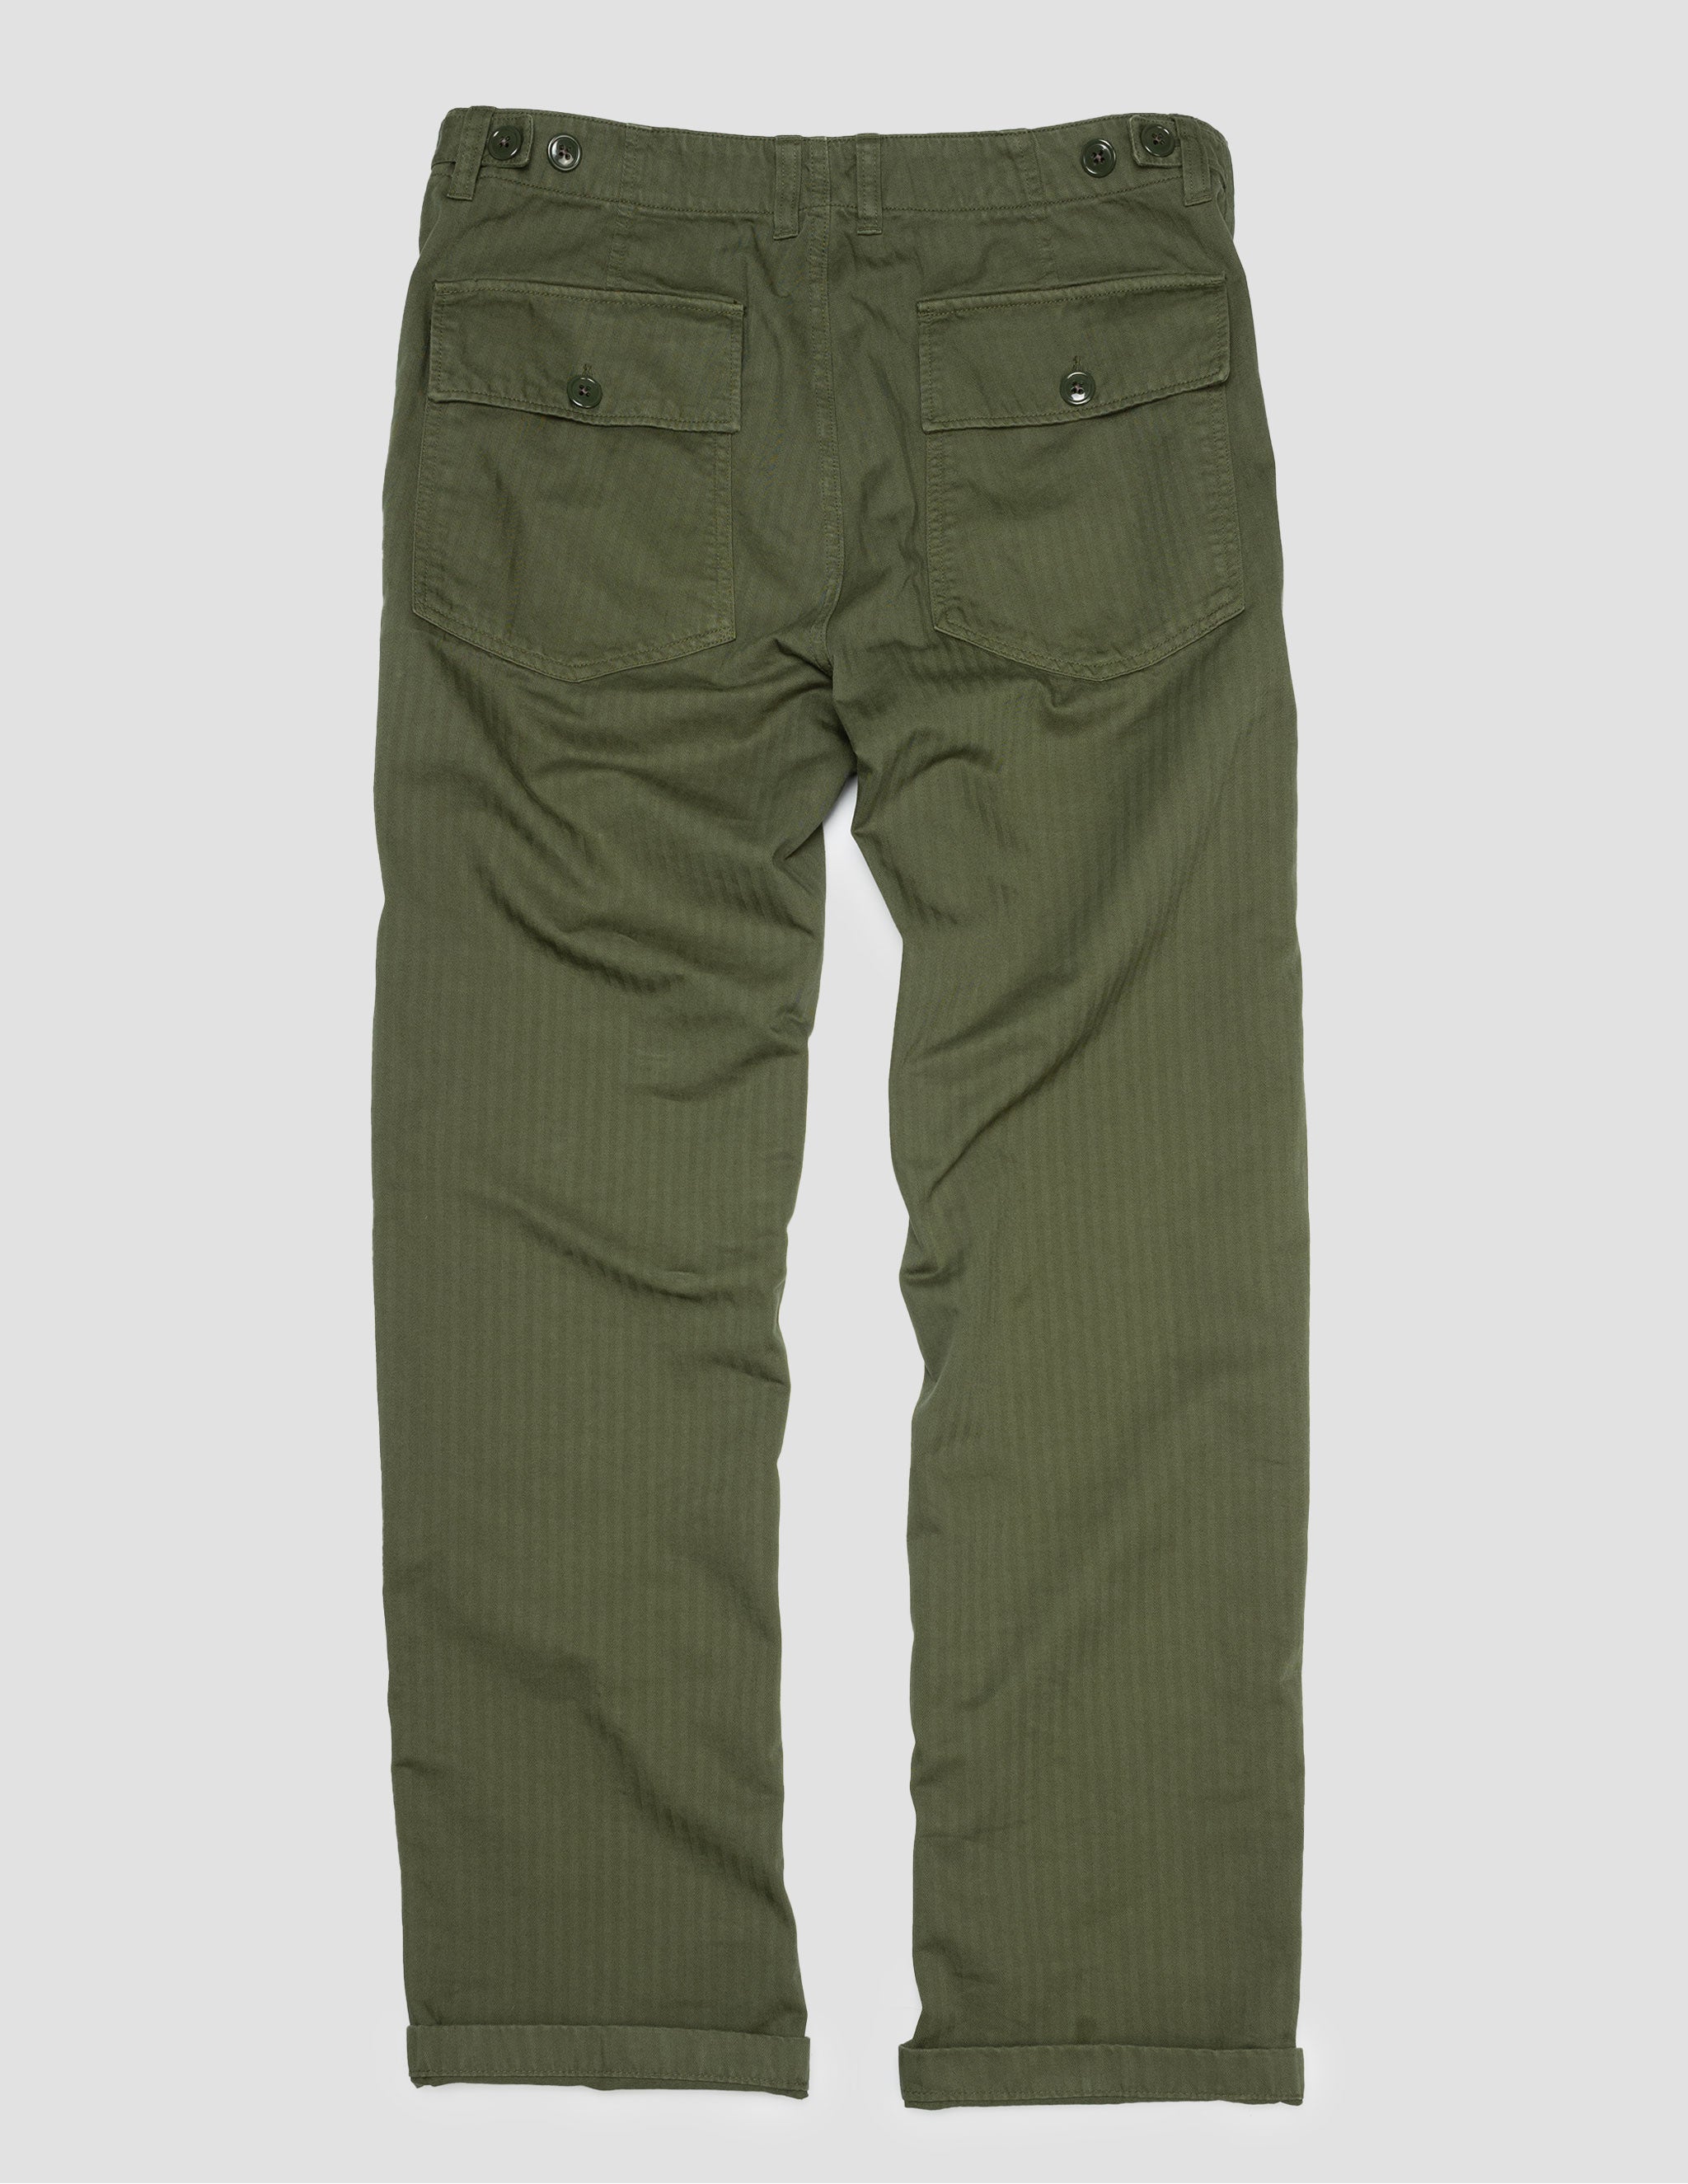 ROTHCO Pants BDU ZIPPER FLY RELAXED OLIVE DRAB | MILITARY RANGE